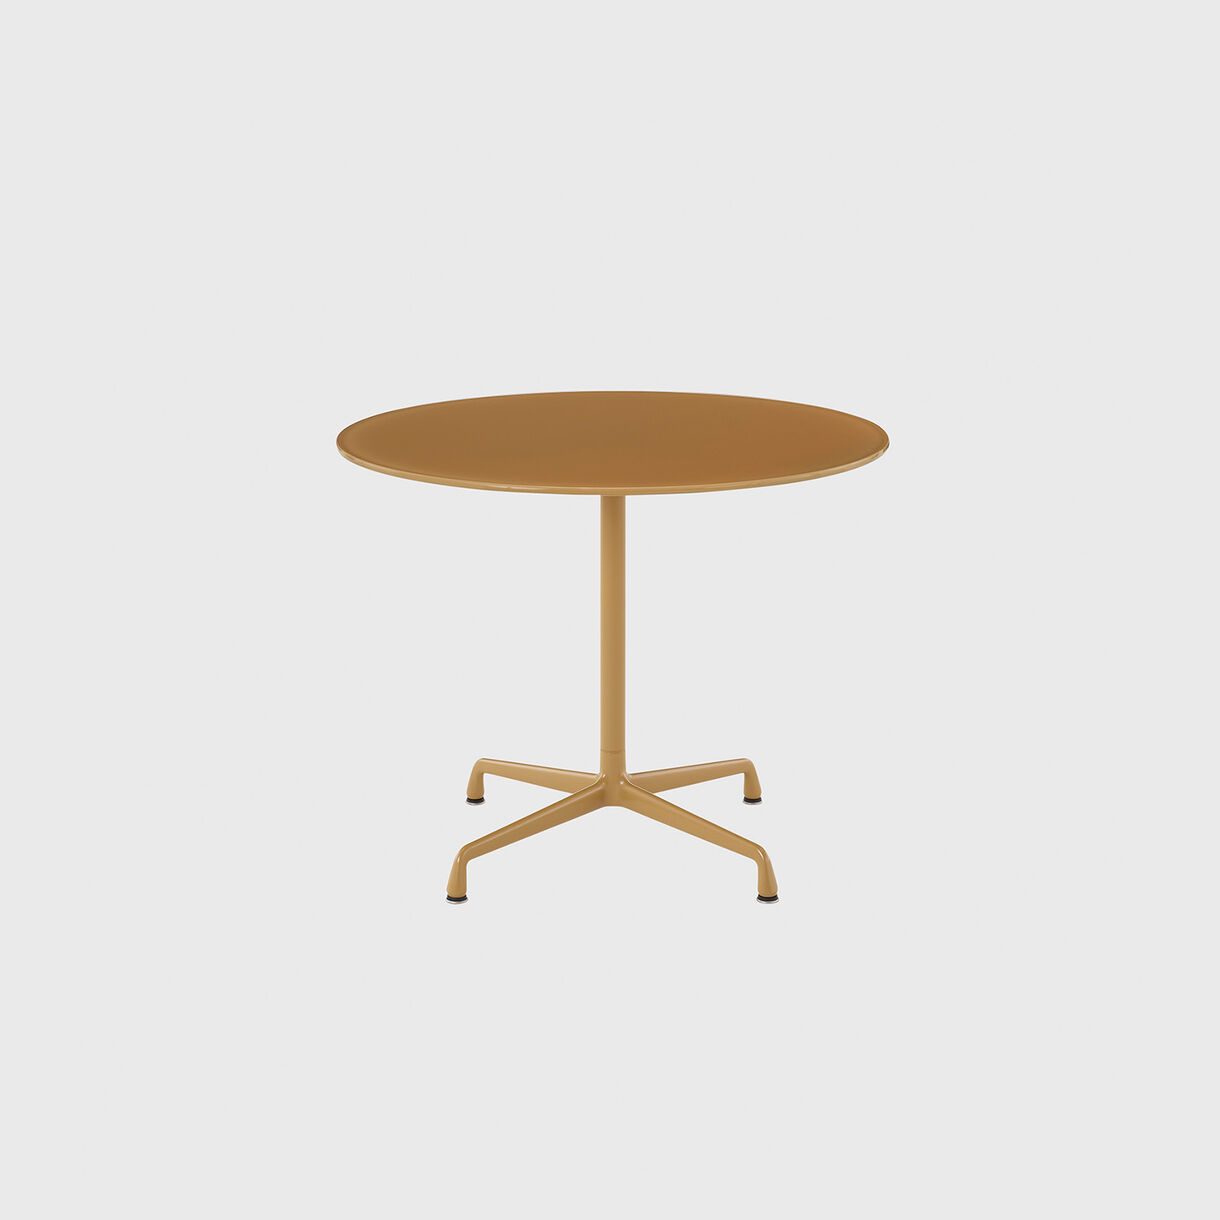 HM x Hay - Eames Table with Universal Base, Toffee